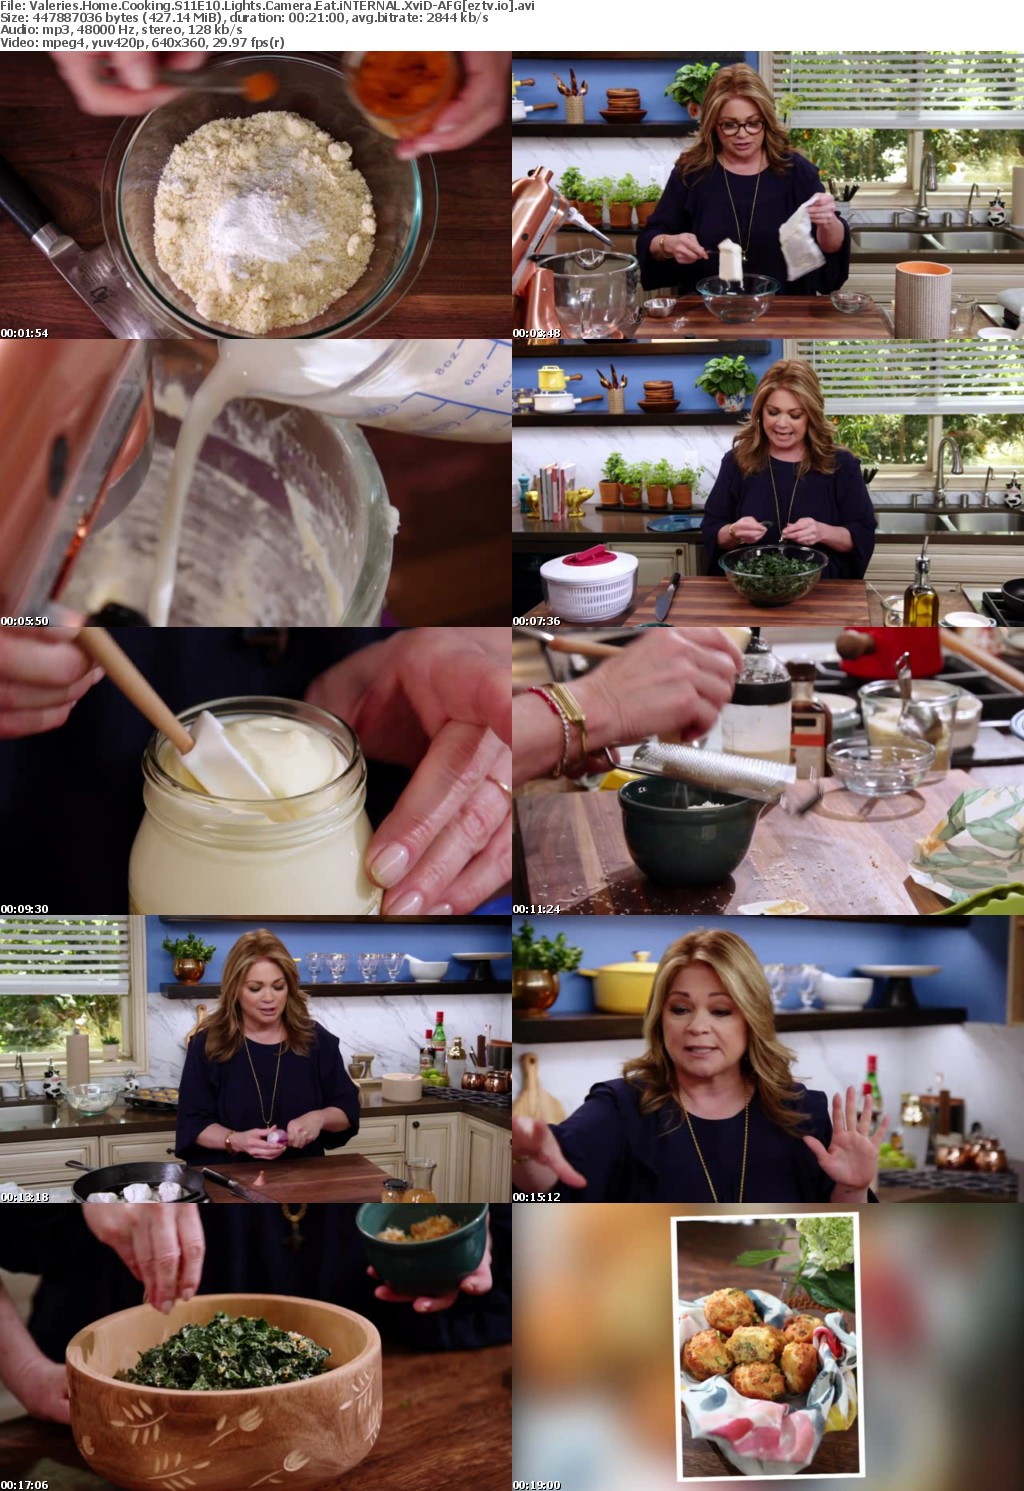 Valeries Home Cooking S11E10 Lights Camera Eat iNTERNAL XviD-AFG